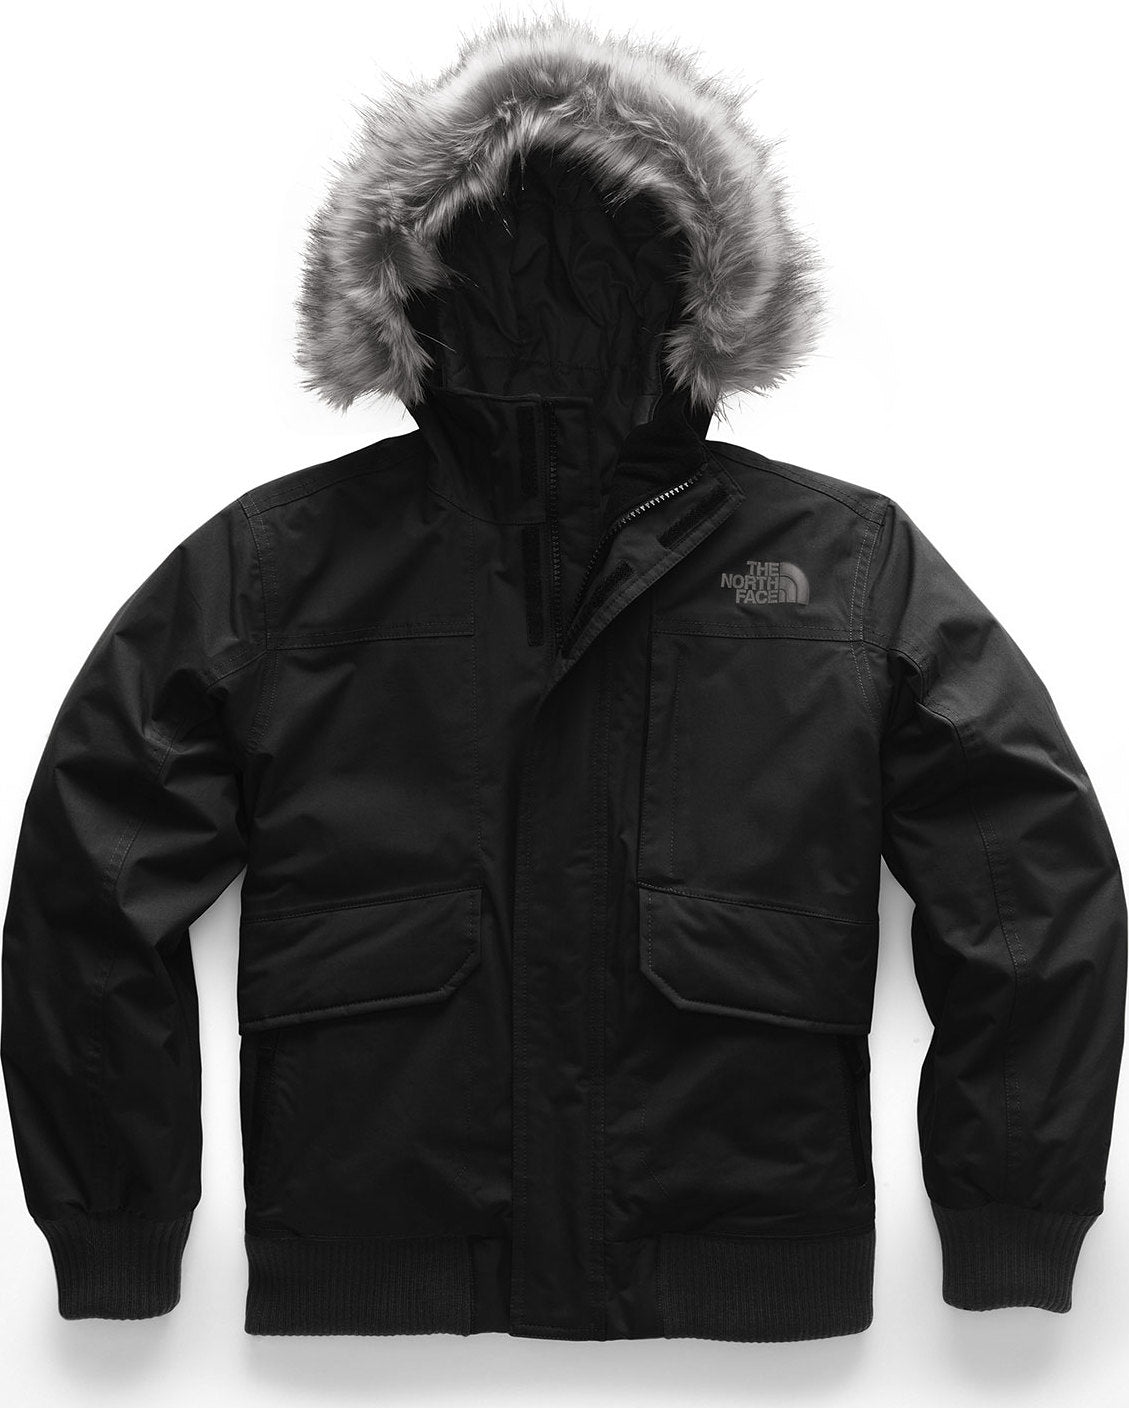 The North Face Gotham Down Jacket 